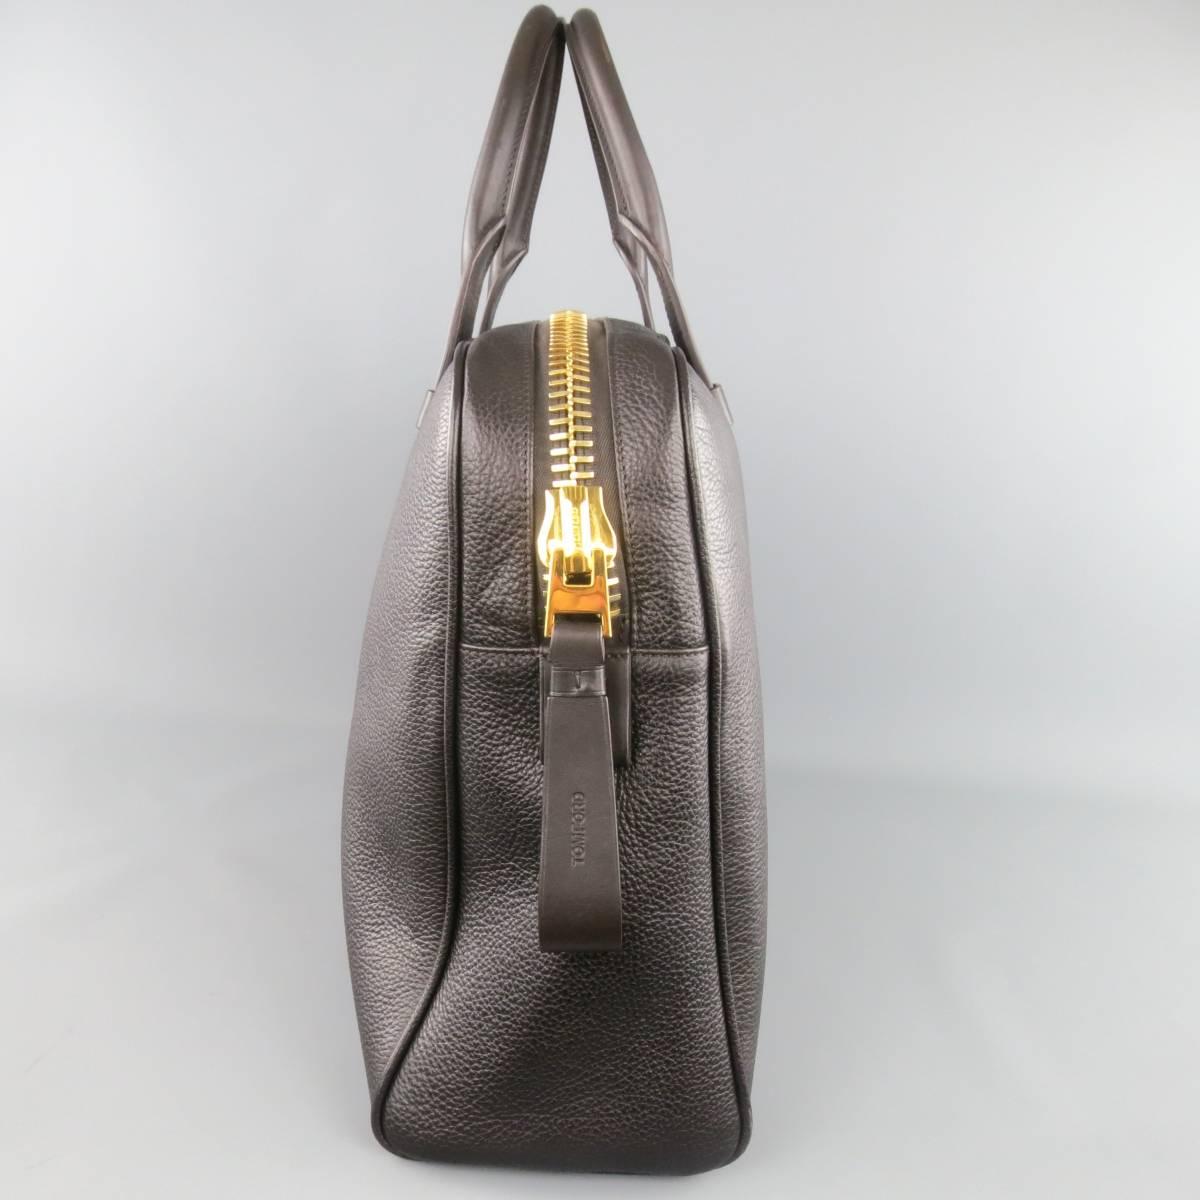 TOM FORD Buckley Leather Flat Trapeze Briefcase comes in a rich chocolate brown pebbled leather and features covered double top handles and oversized gold tone zipper closure. Made in Italy.

Good Pre-Owned Condition.
 
Measurements:
 
Length: 20